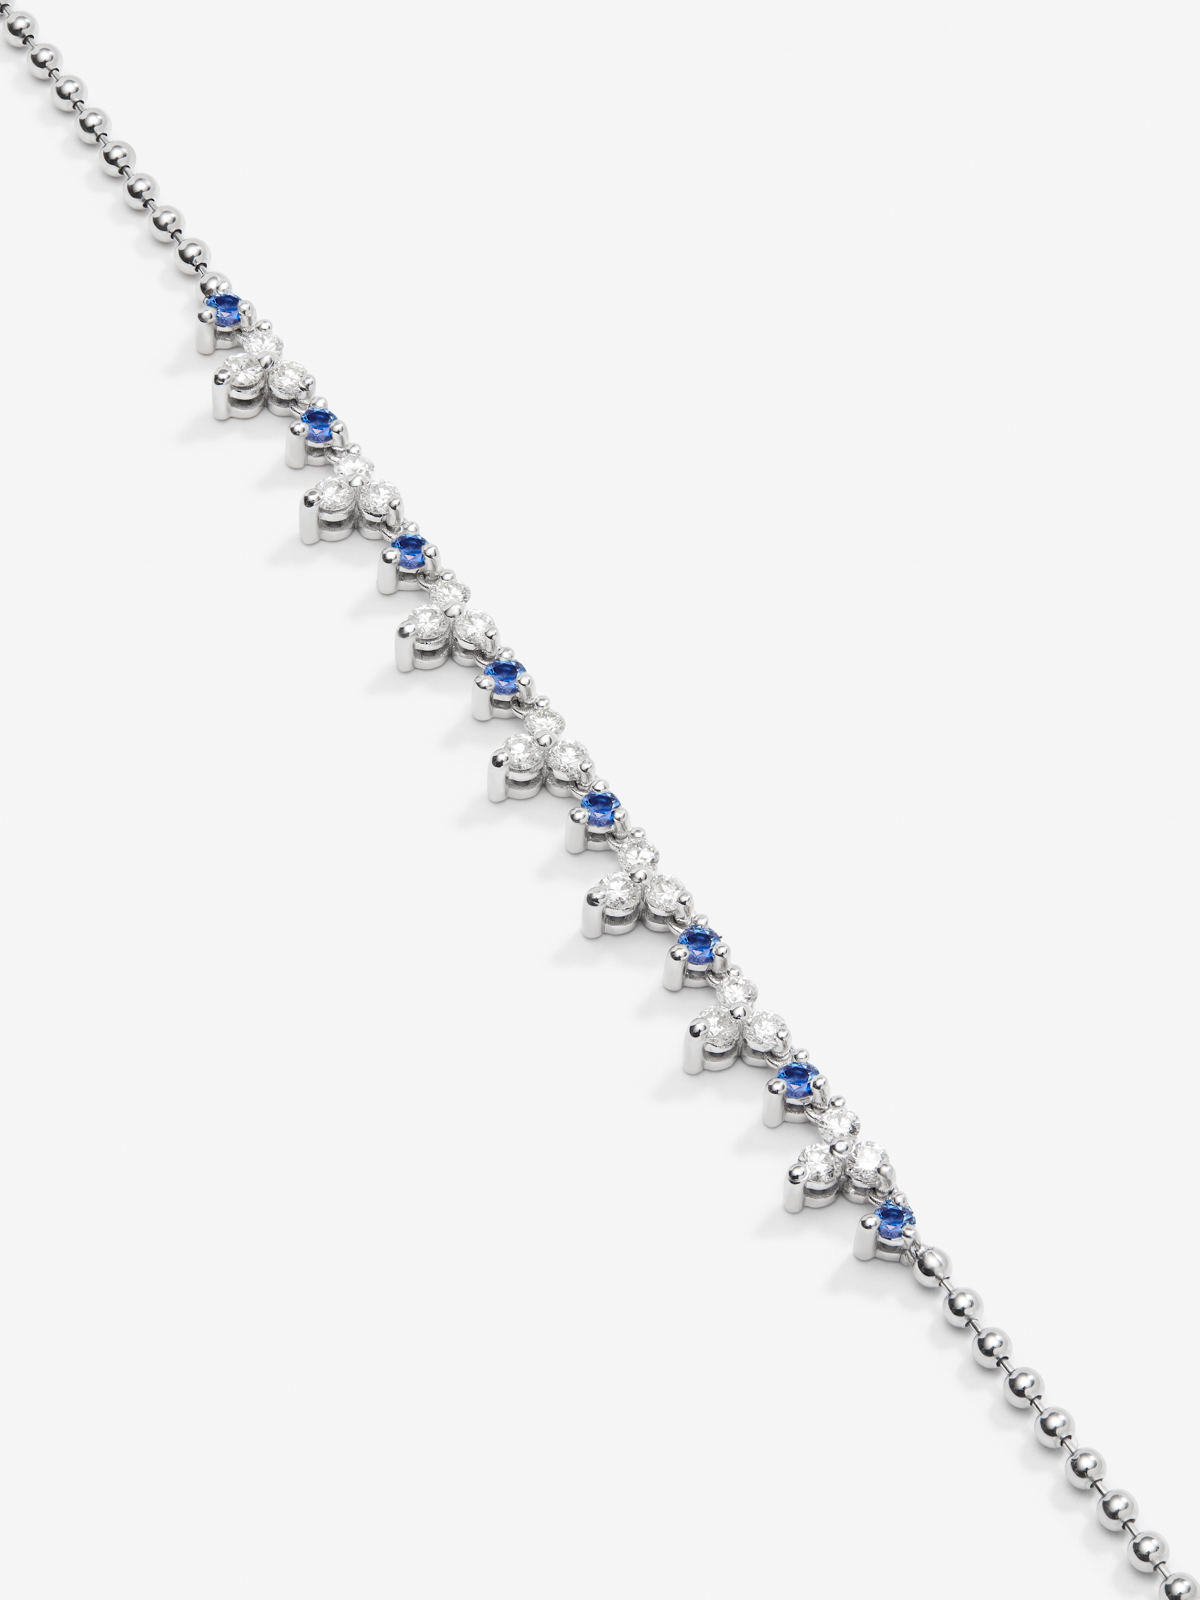 18K white gold pendant with blue zafiros in bright size 1.35 cts and white diamonds of 1.25 cts